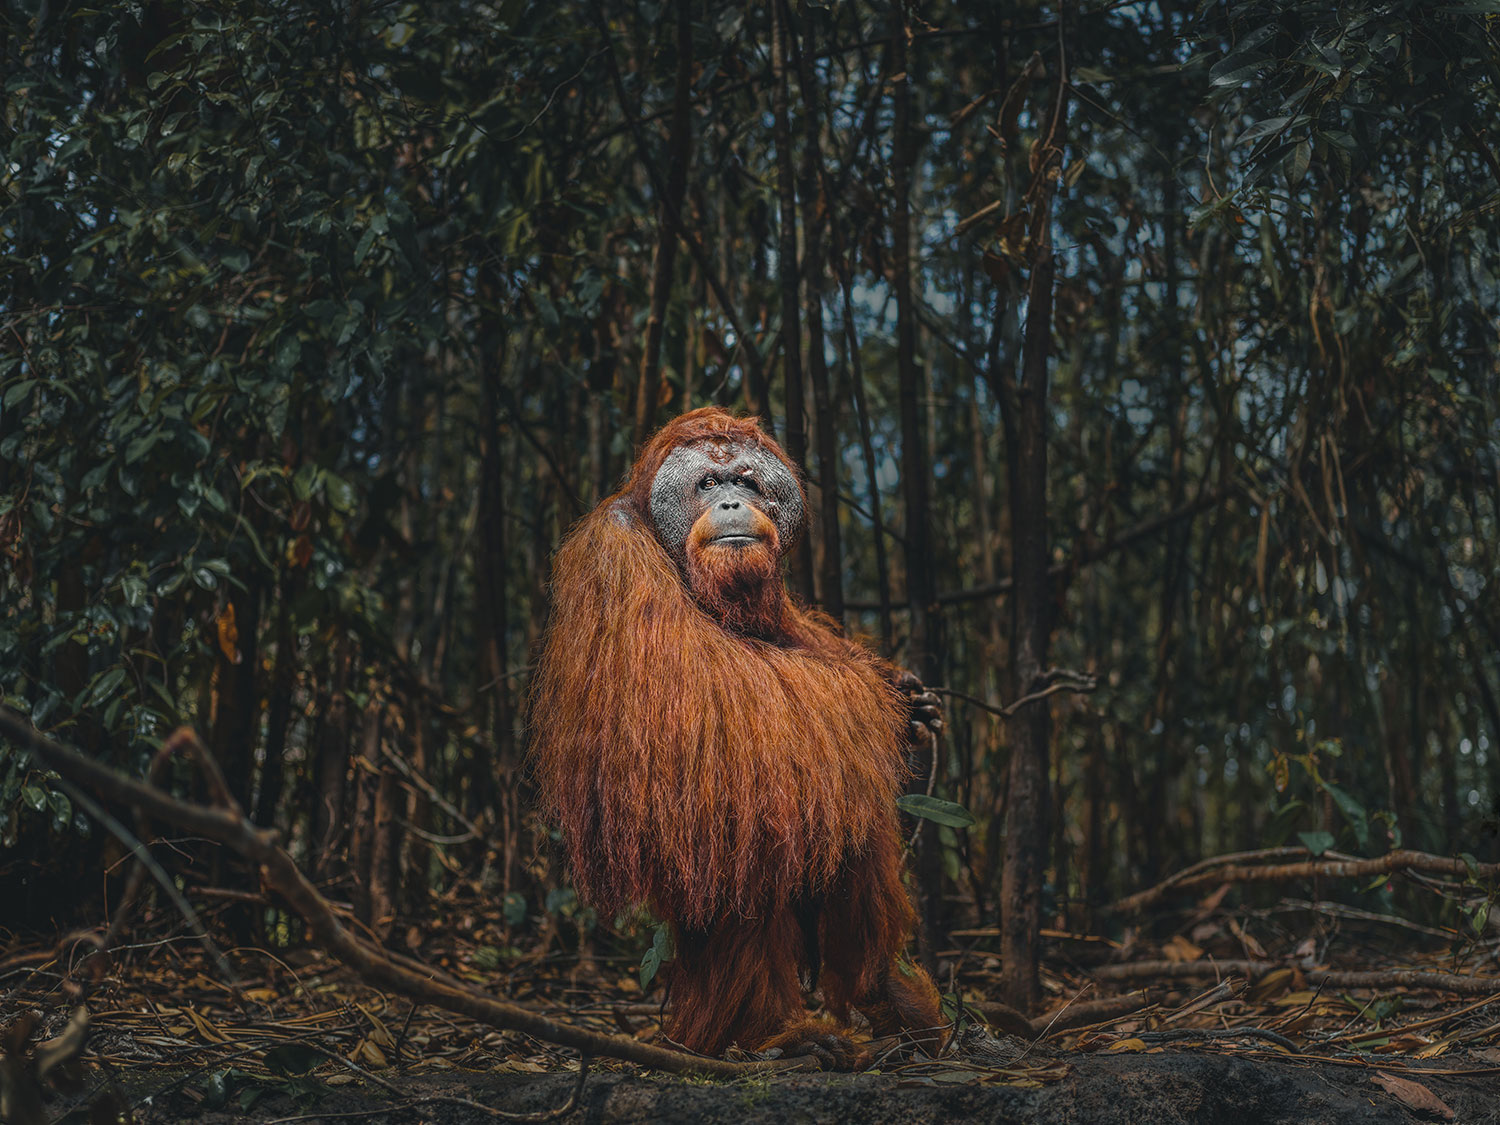 Photo of a large furry, orange orangutan standing in the middle of a small clearing in a dark green tropica forest. The orangutan is looking to the side at the camera as if its attention was captured mid-walk.